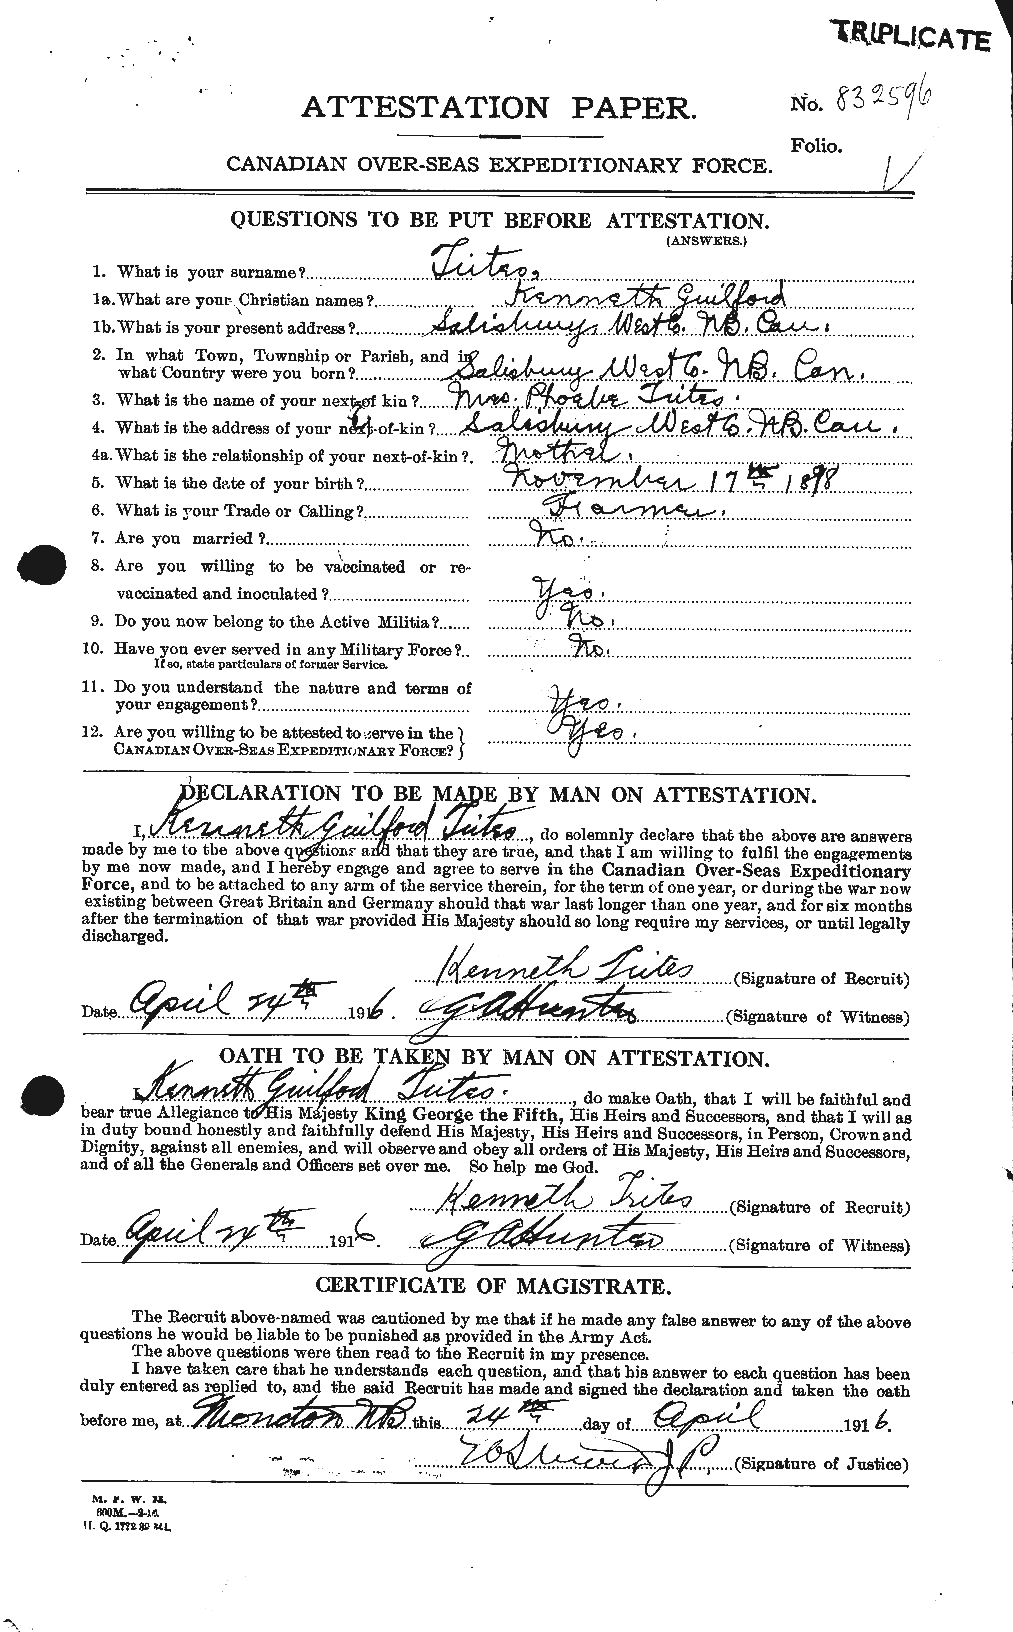 Personnel Records of the First World War - CEF 640153a